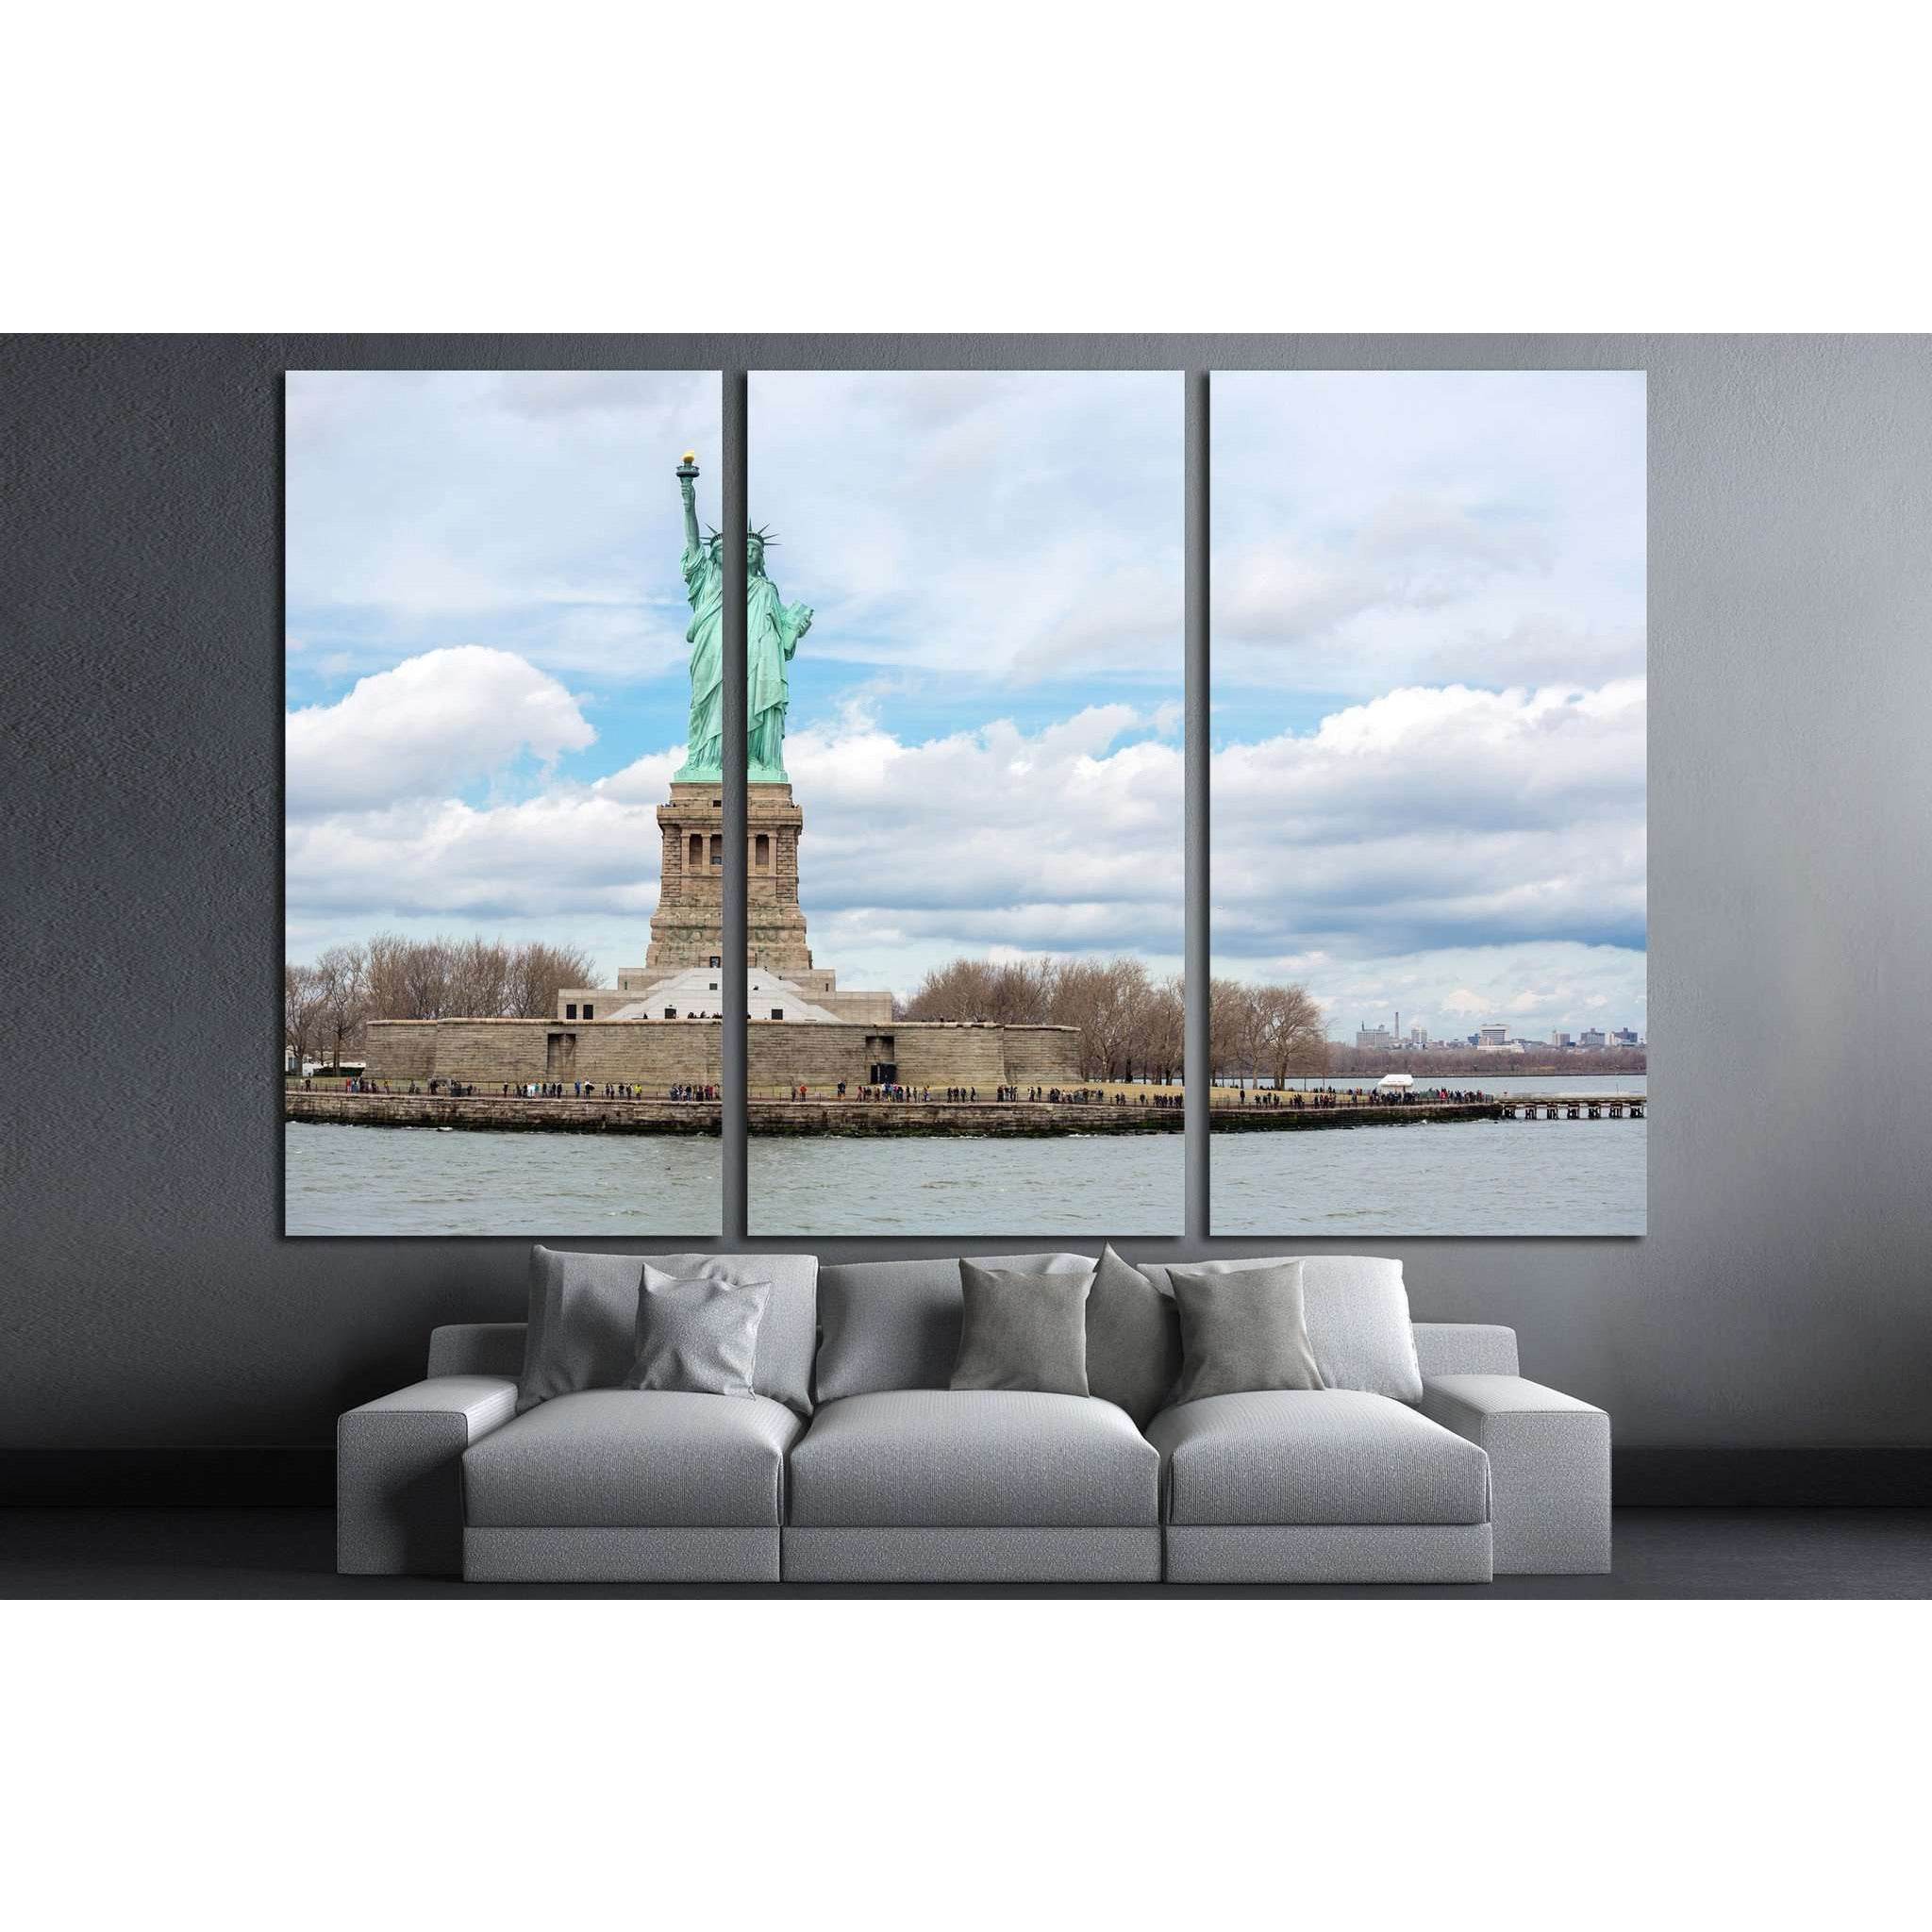 The Statue of Liberty in New York City №1210 Ready to Hang Canvas Print